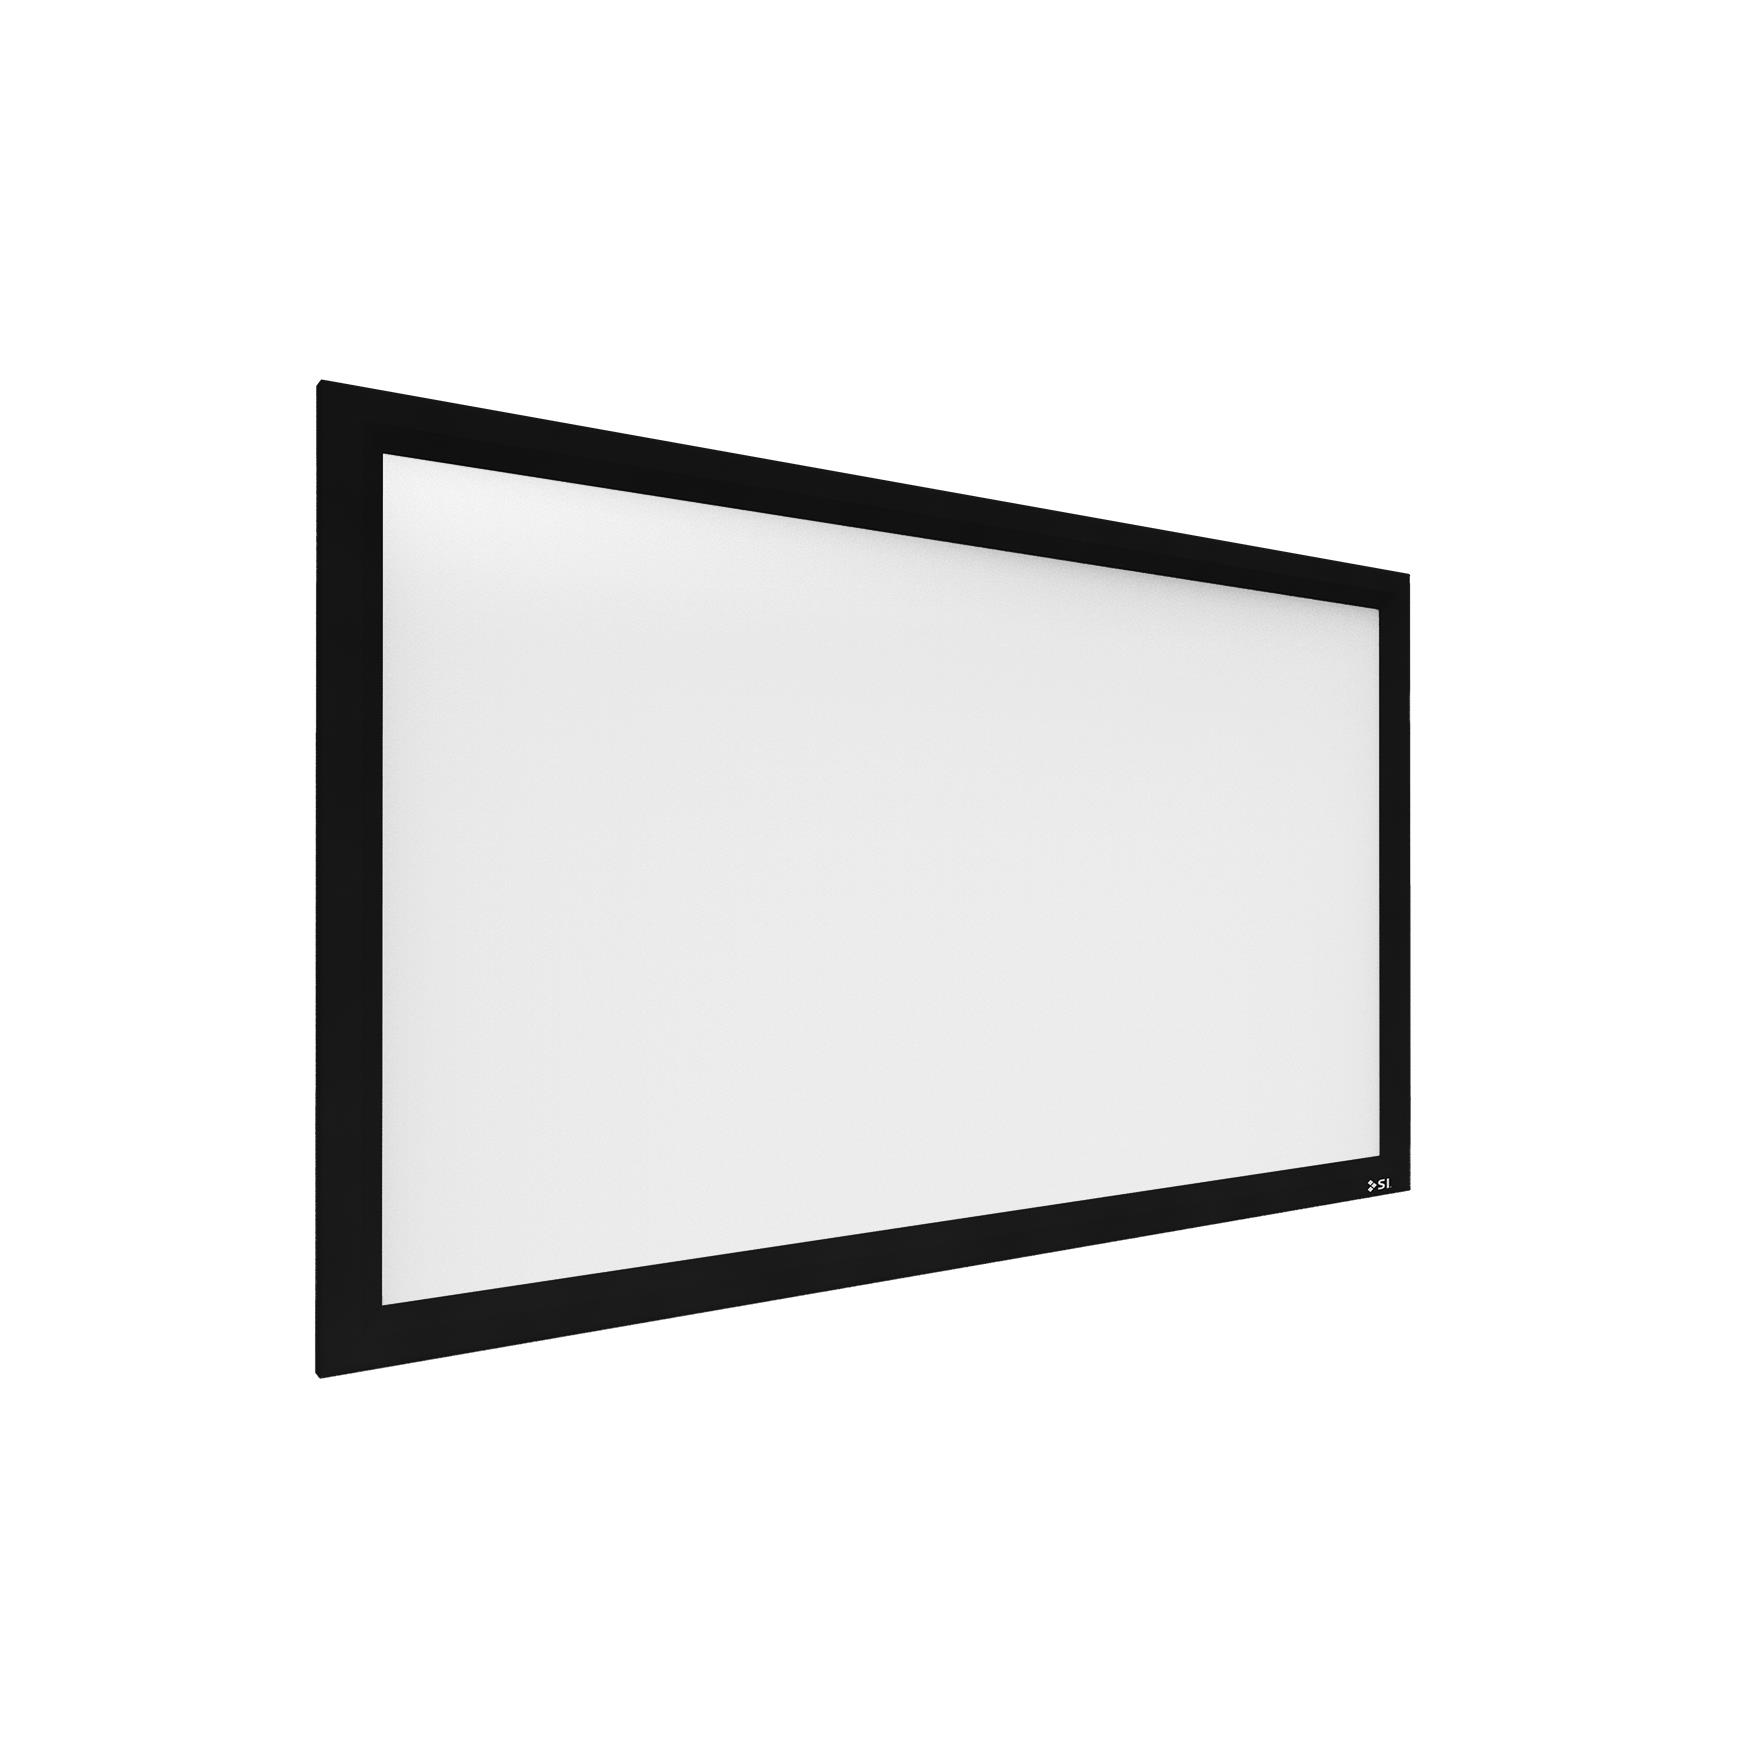 Screen Innovations 3 Series Fixed - 133